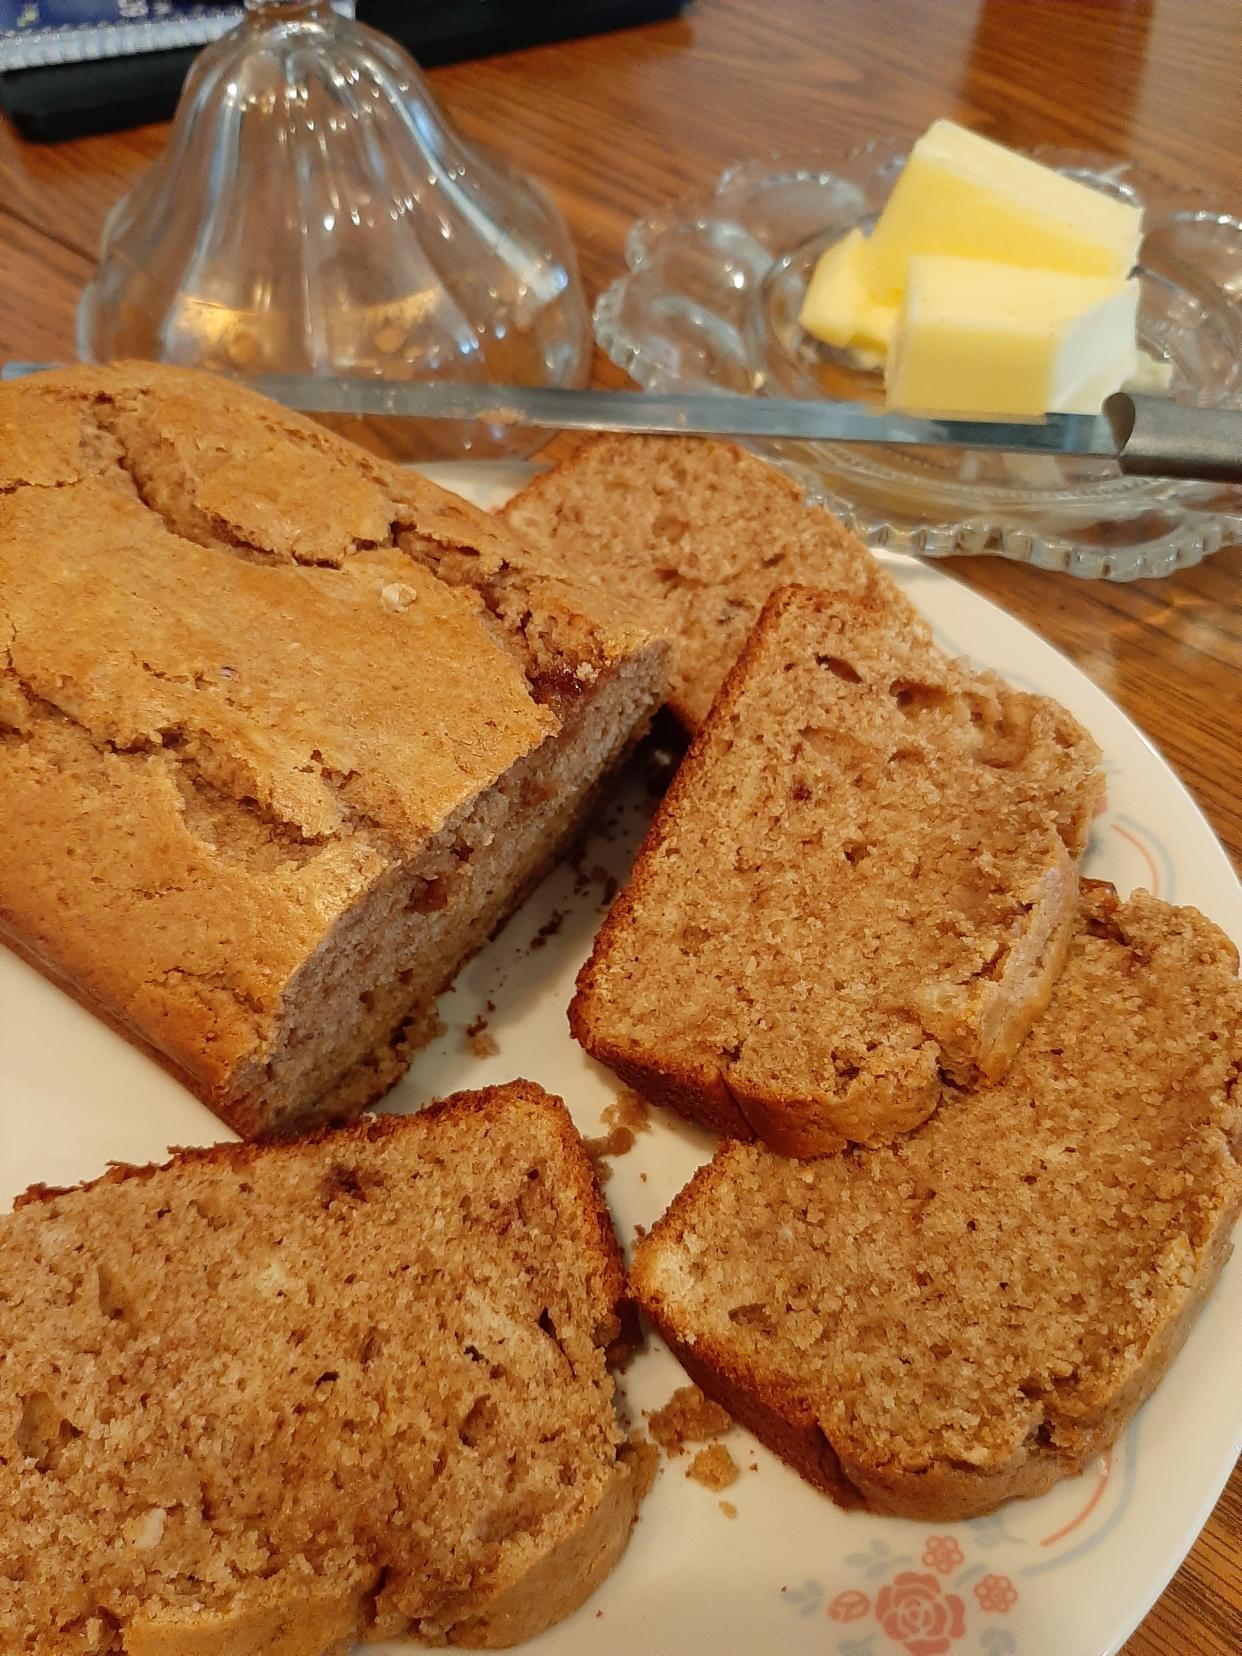 Banana Bread with or without nuts has been a staple in the United States since the Great Depression.